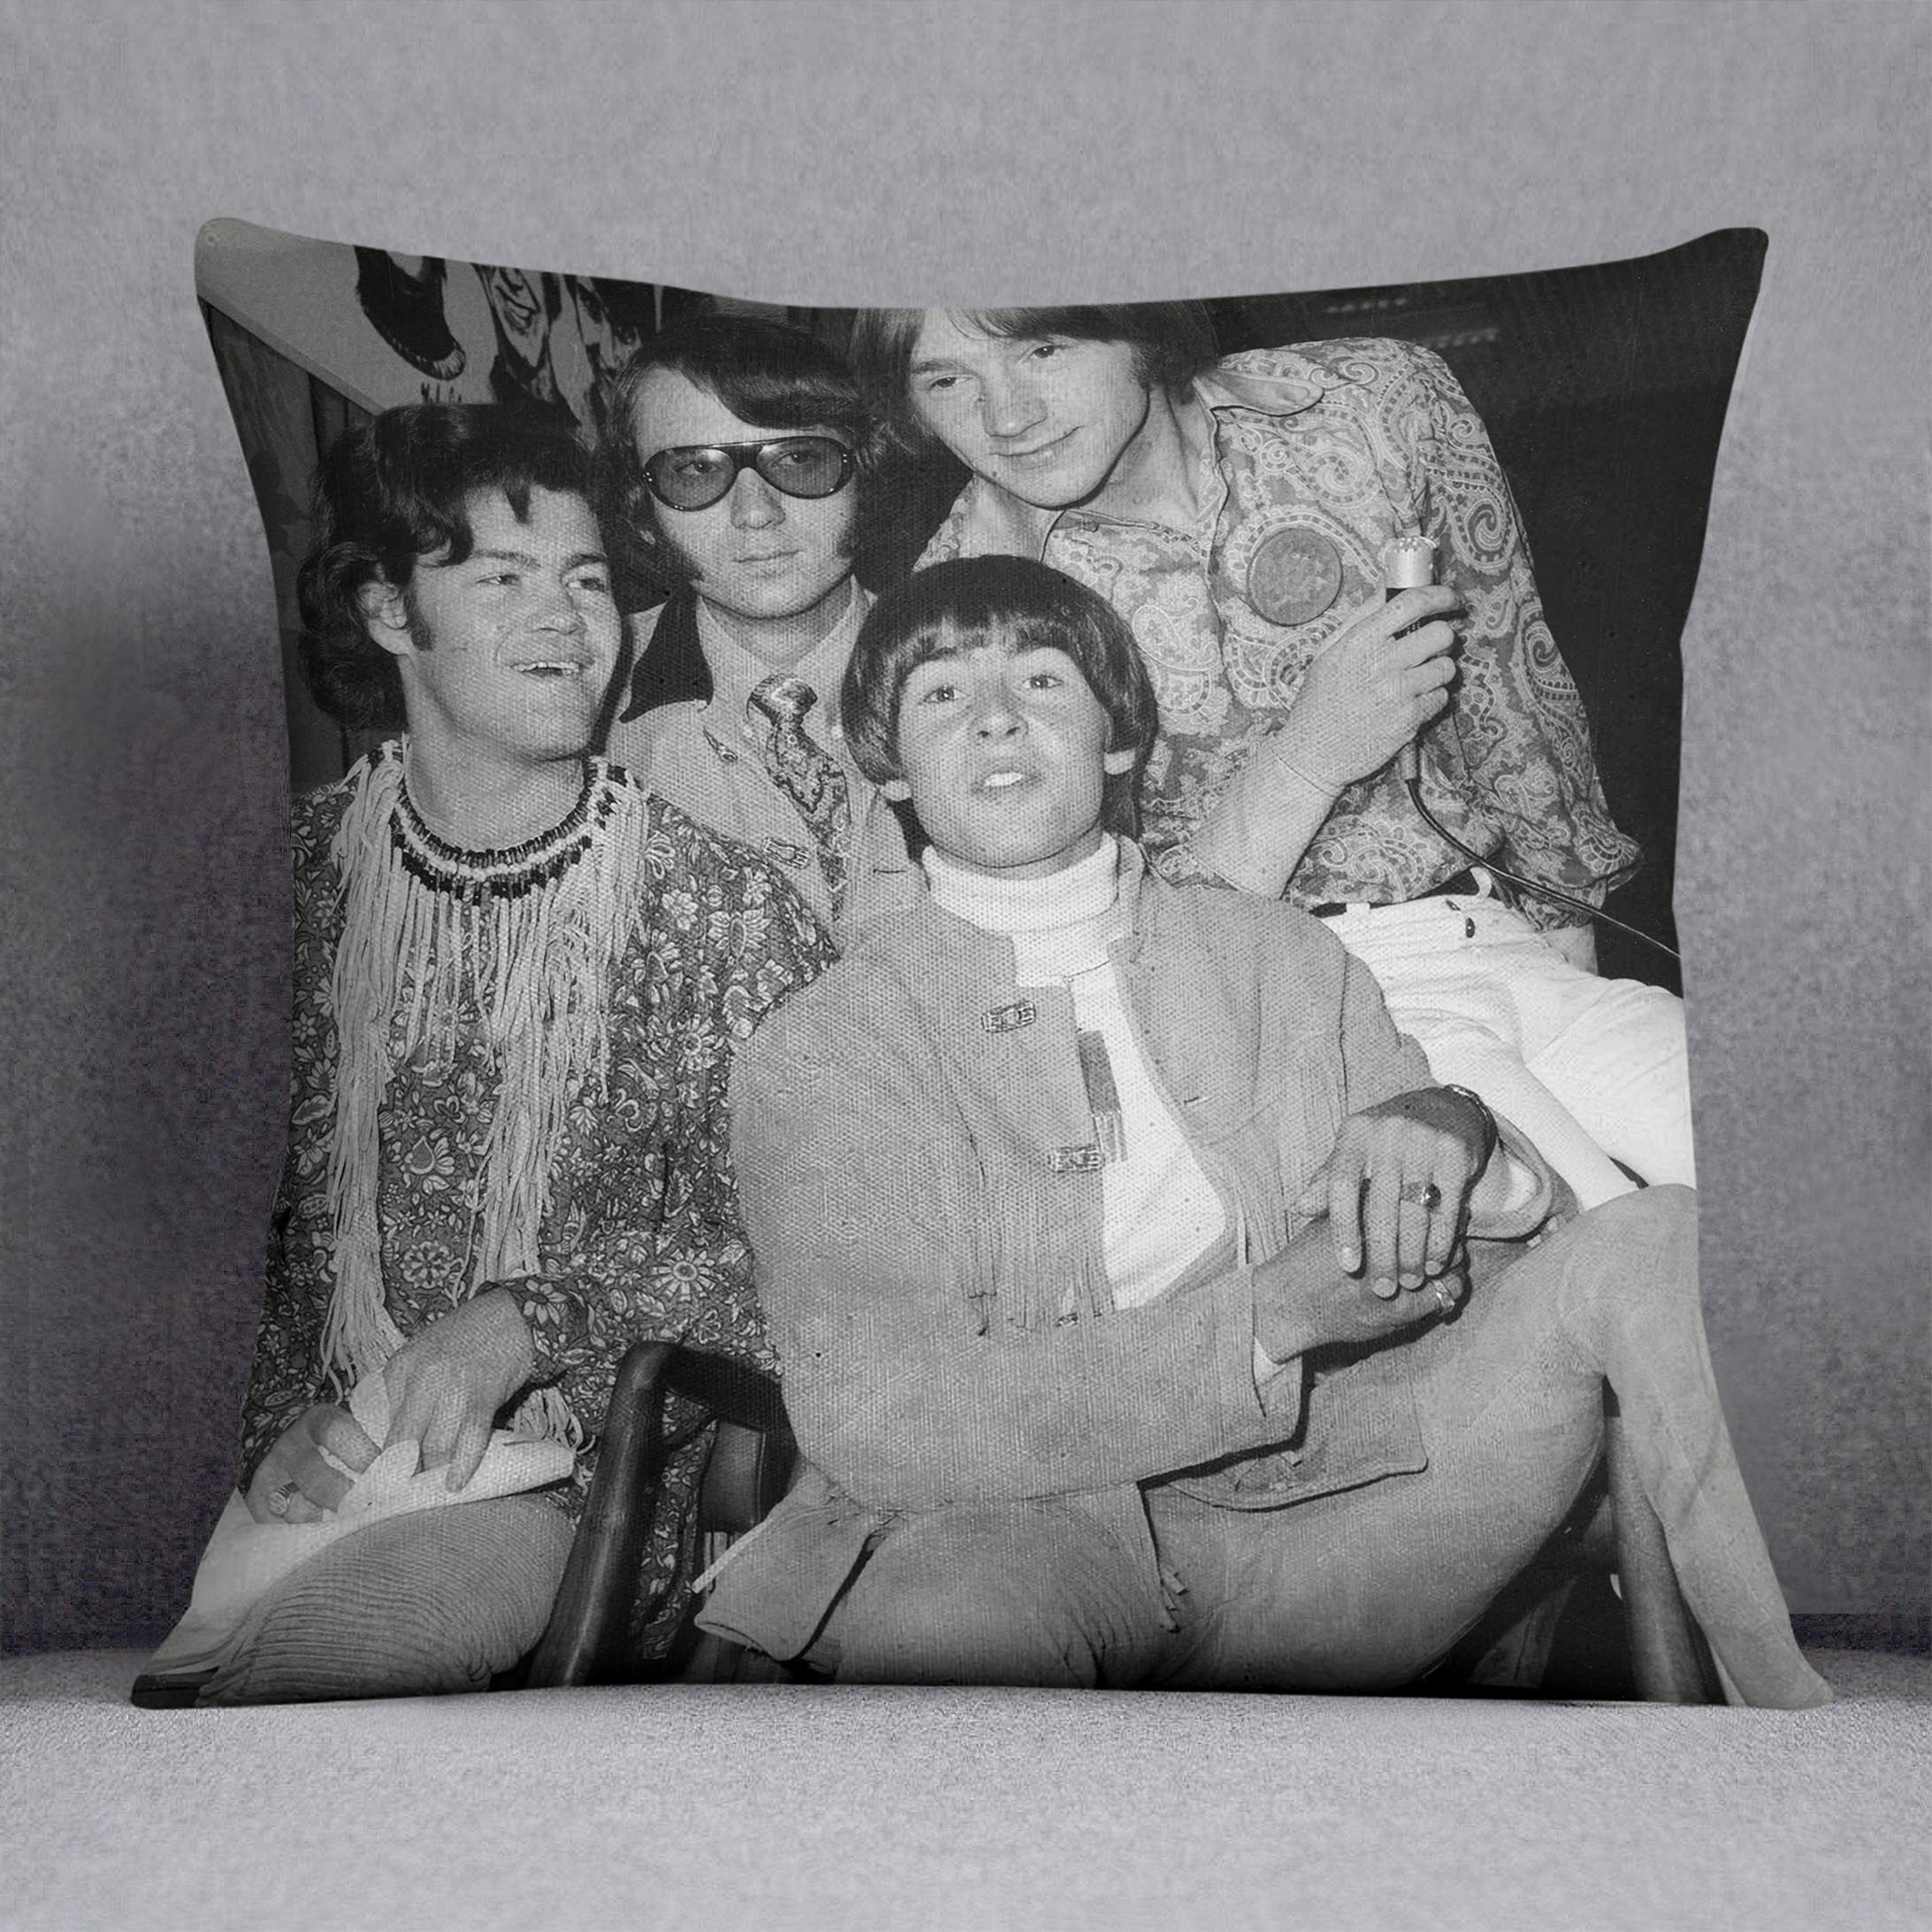 The Monkees sitting Cushion